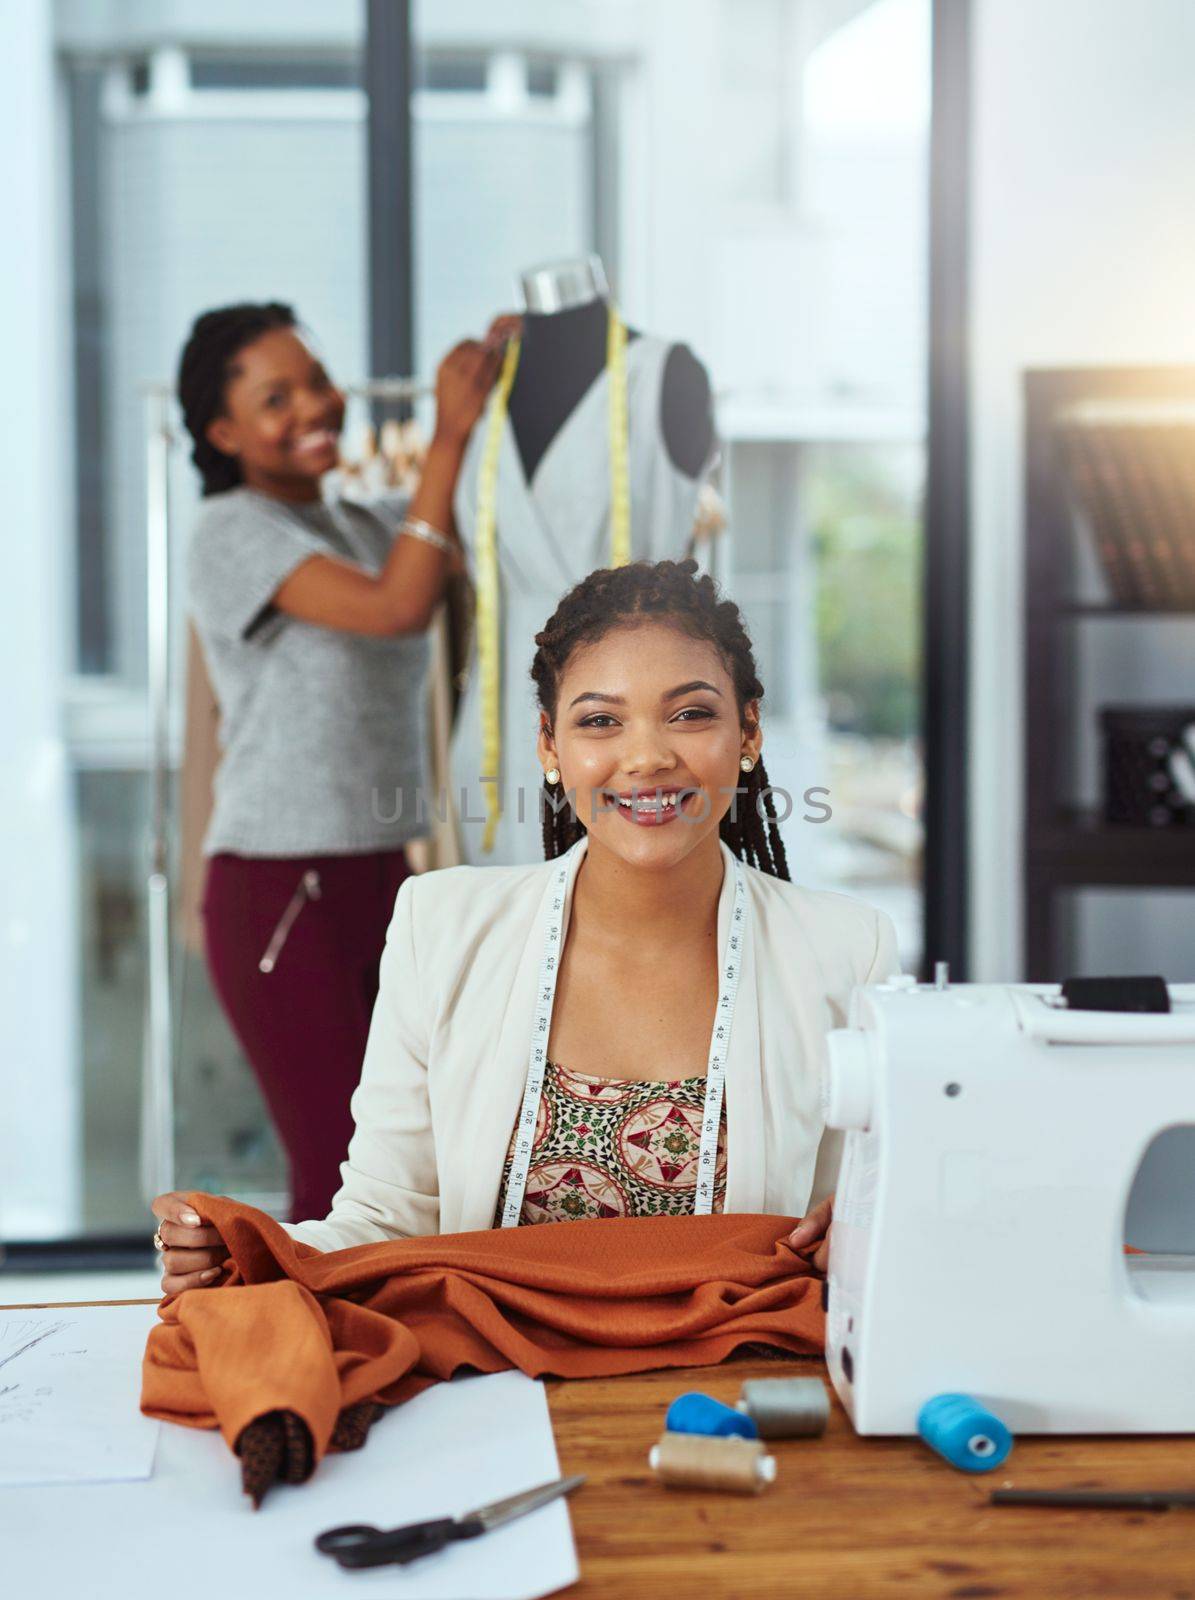 Working hard to achieve our goals. Portrait of a young fashion designer sewing garments while a colleague works on a mannequin in the background